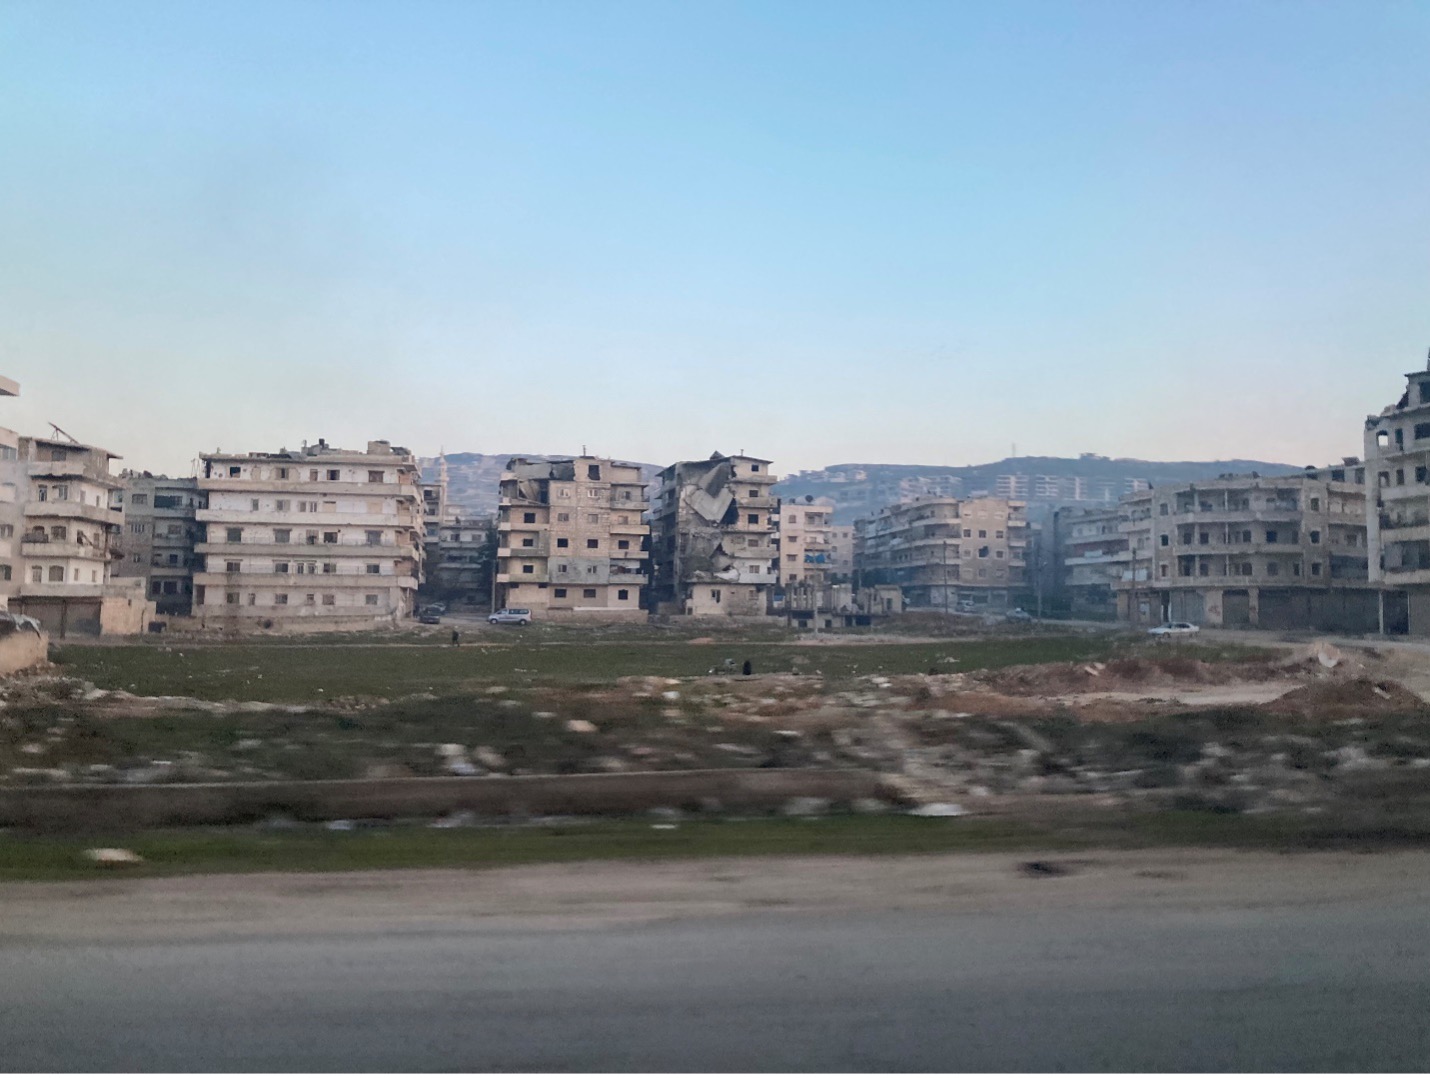 Similarly, while the city of Ariha, in central Idlib, handled the quake well, it remains devasted from years of regime attacks. It is another reminder of the need for reconstruction assistance beyond just the damage caused by the quake.